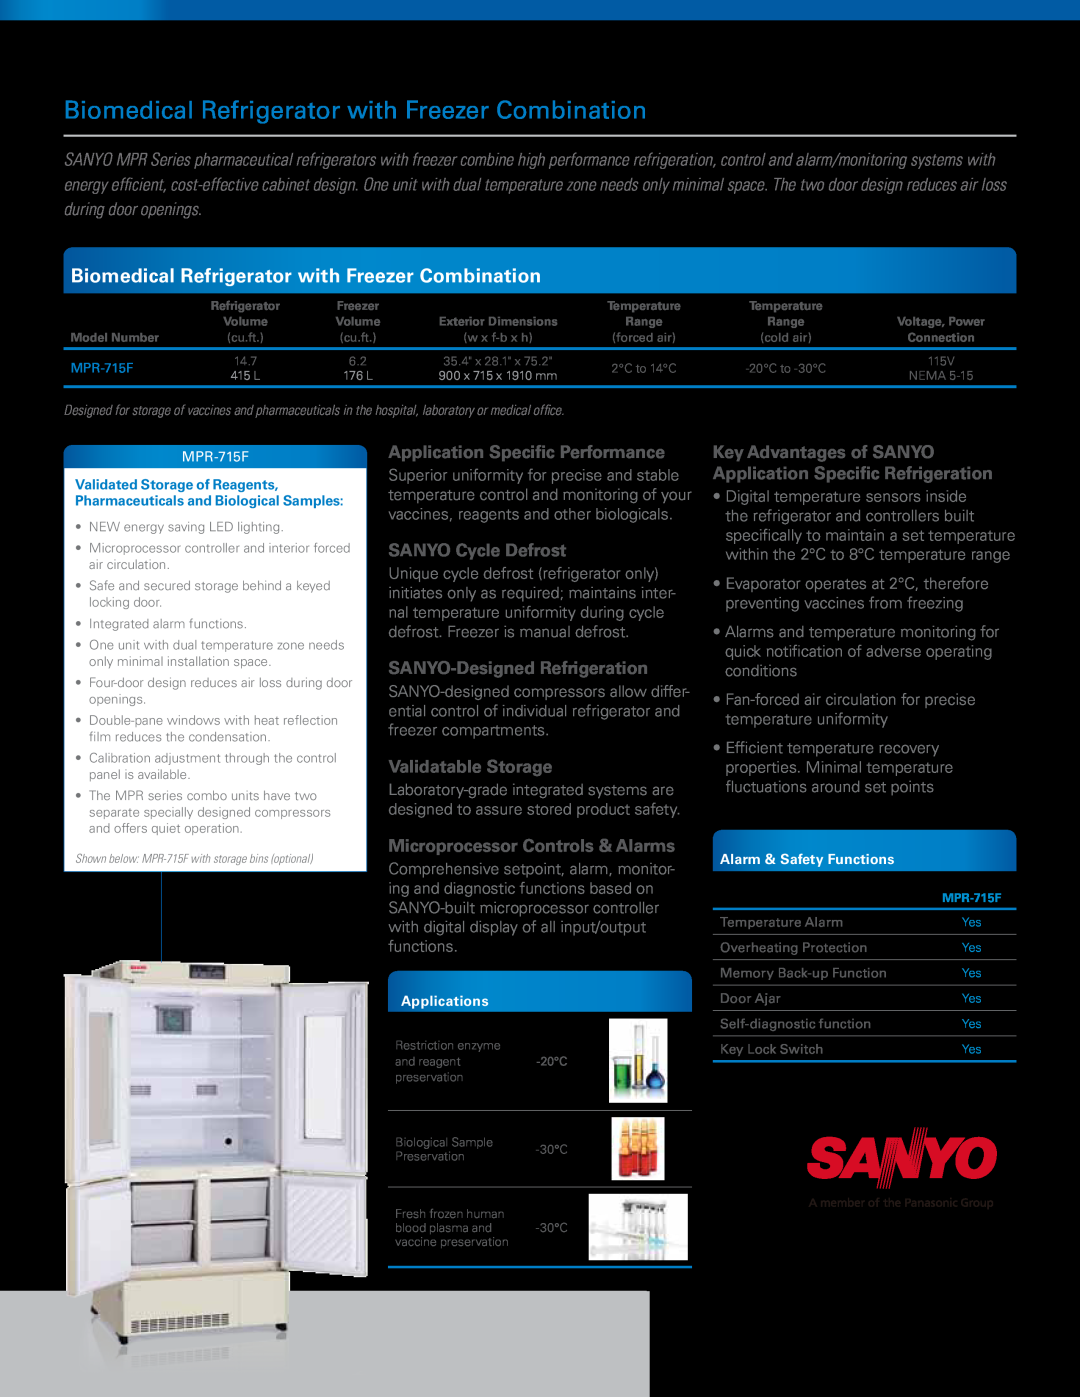 Sanyo MPR-715F Biomedical Refrigerator with Freezer Combination, Application Specific Performance, SANYO Cycle Defrost 